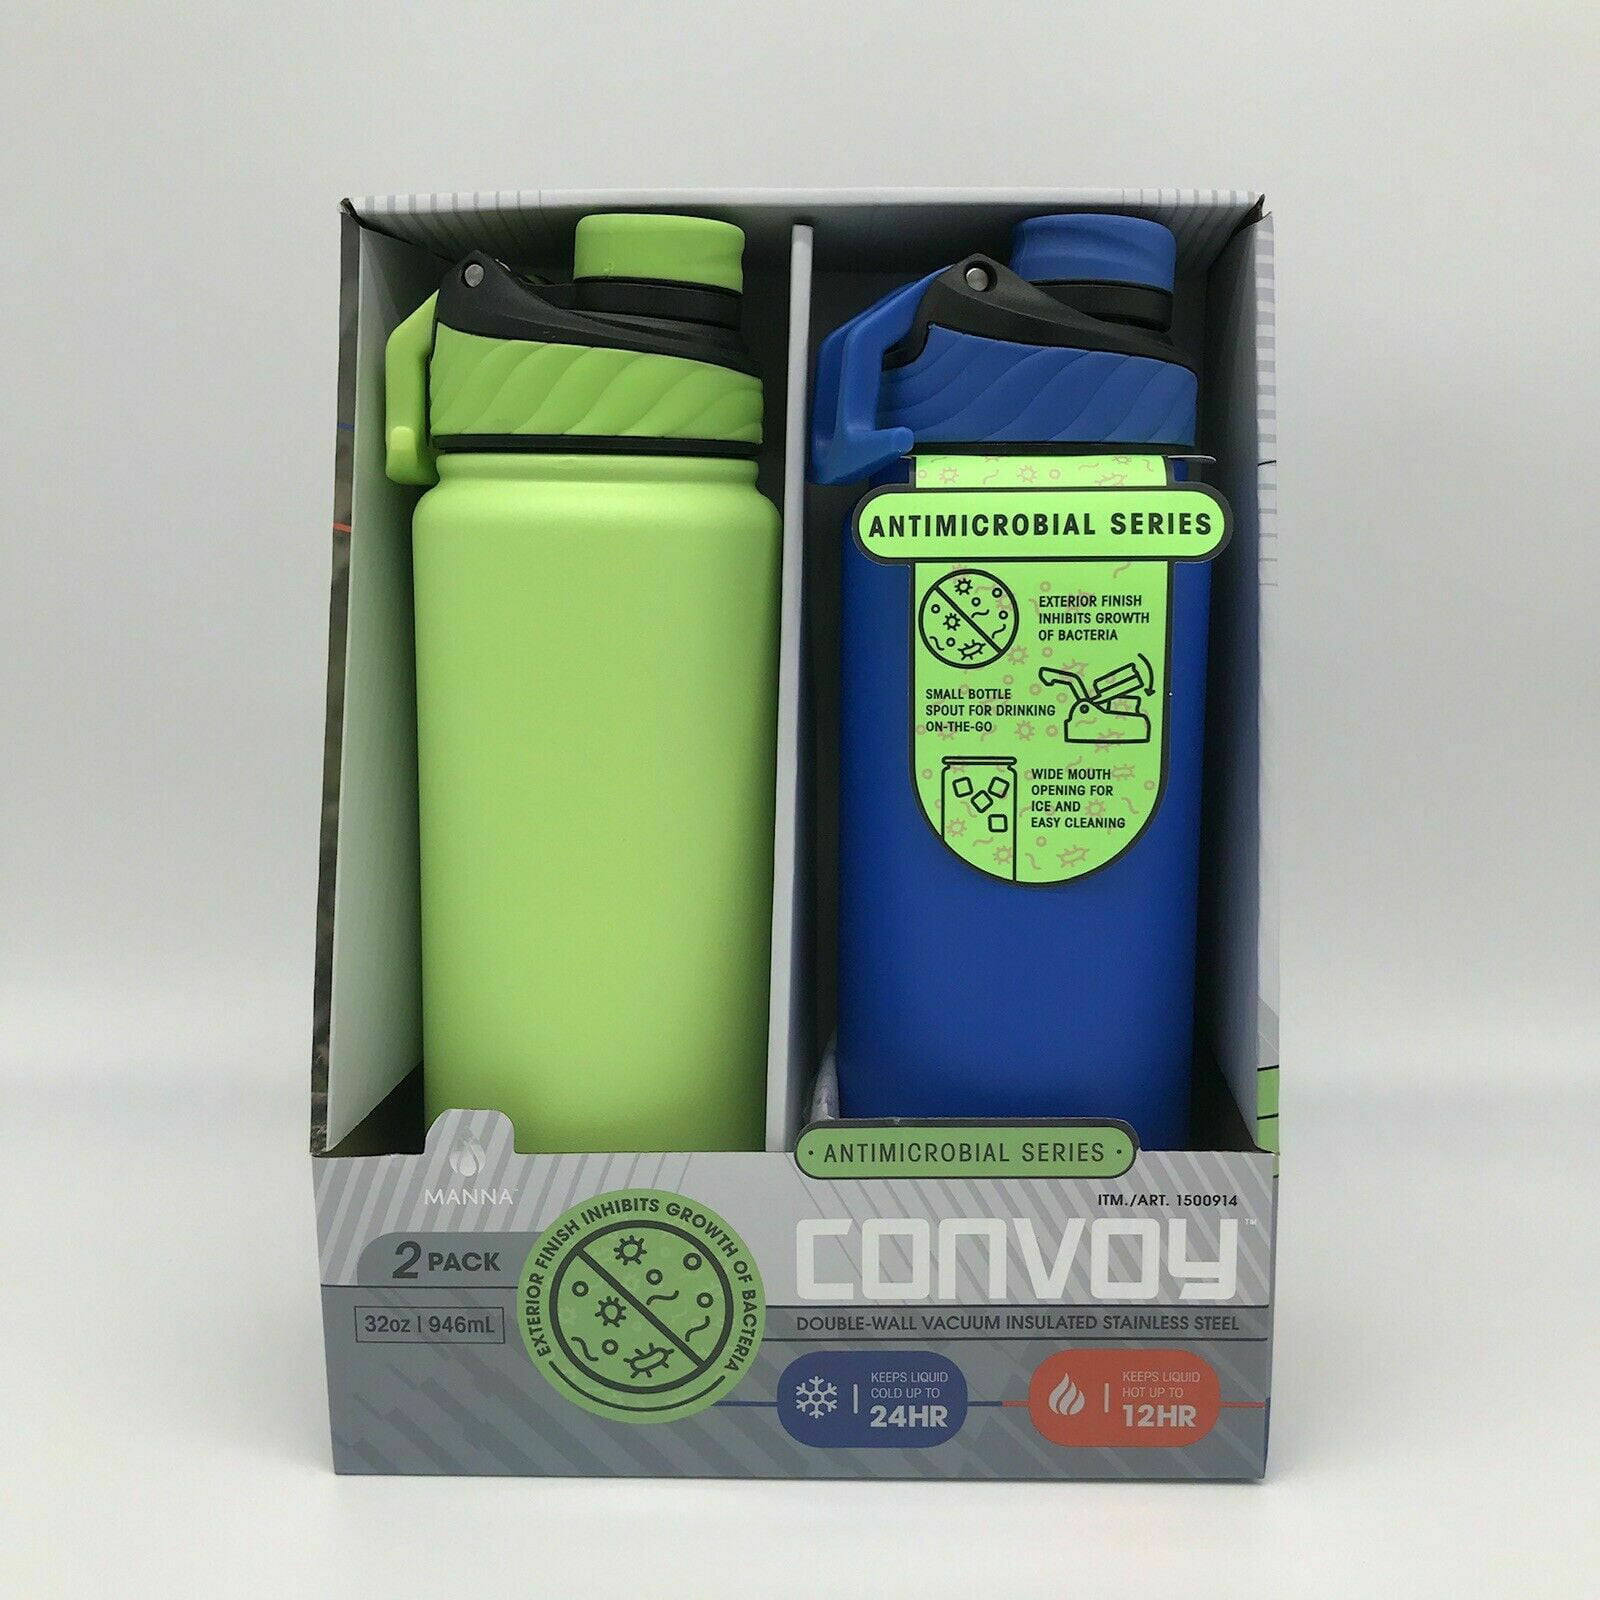 Manna Double-Wall Vacuum Insulated Stainless Steel Convoy 32oz Water Bottles. 